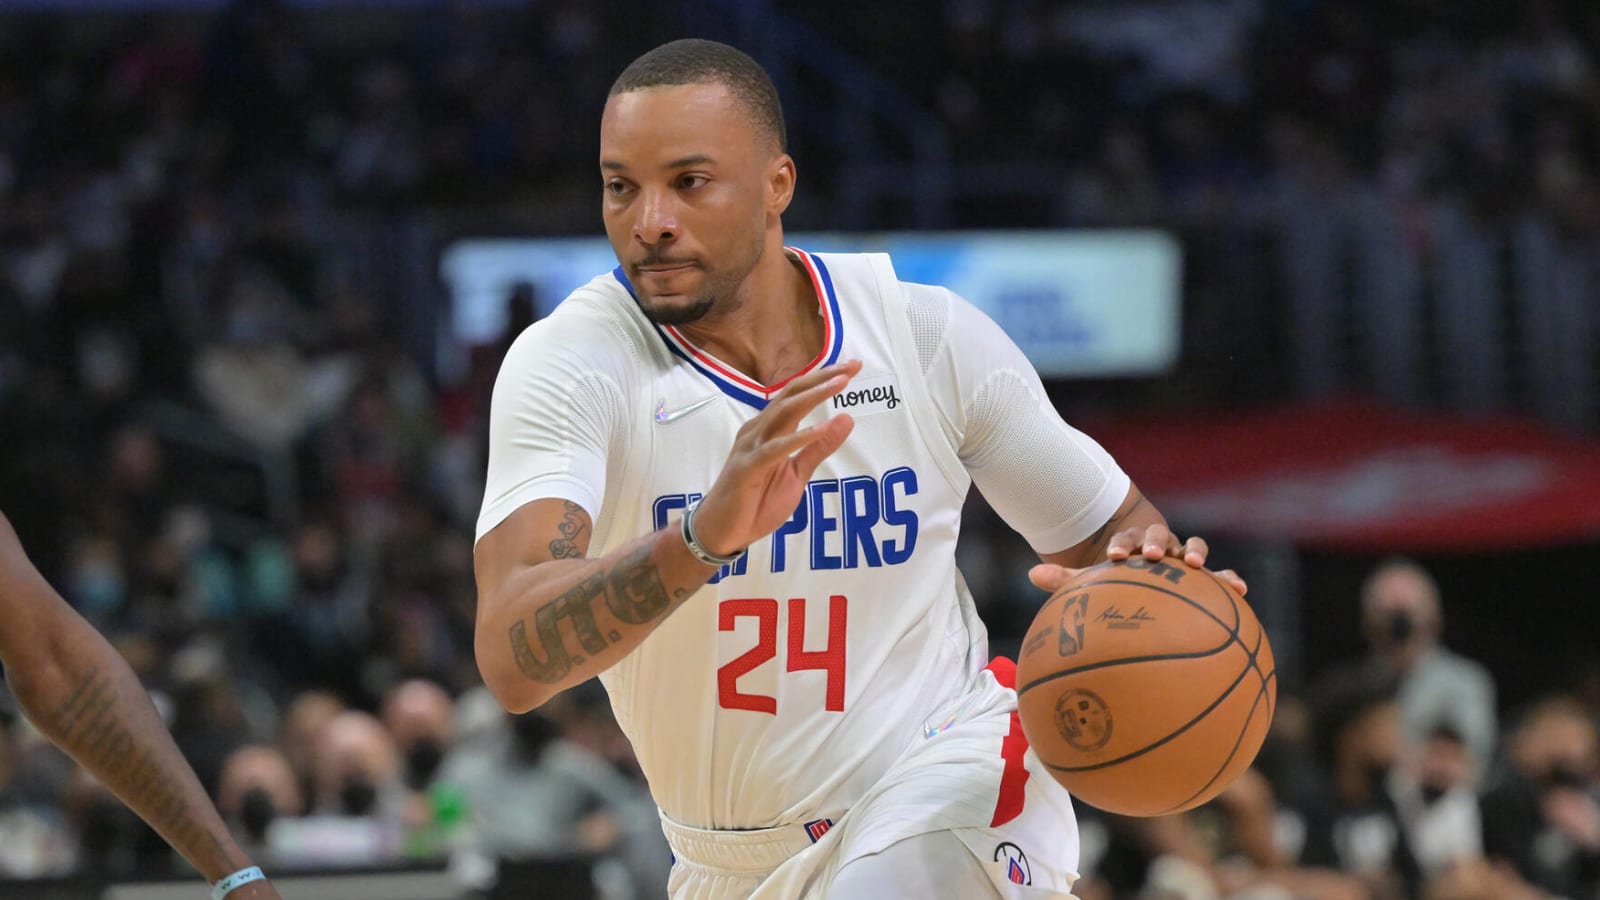 Did Blazers blindside Norman Powell with trade?